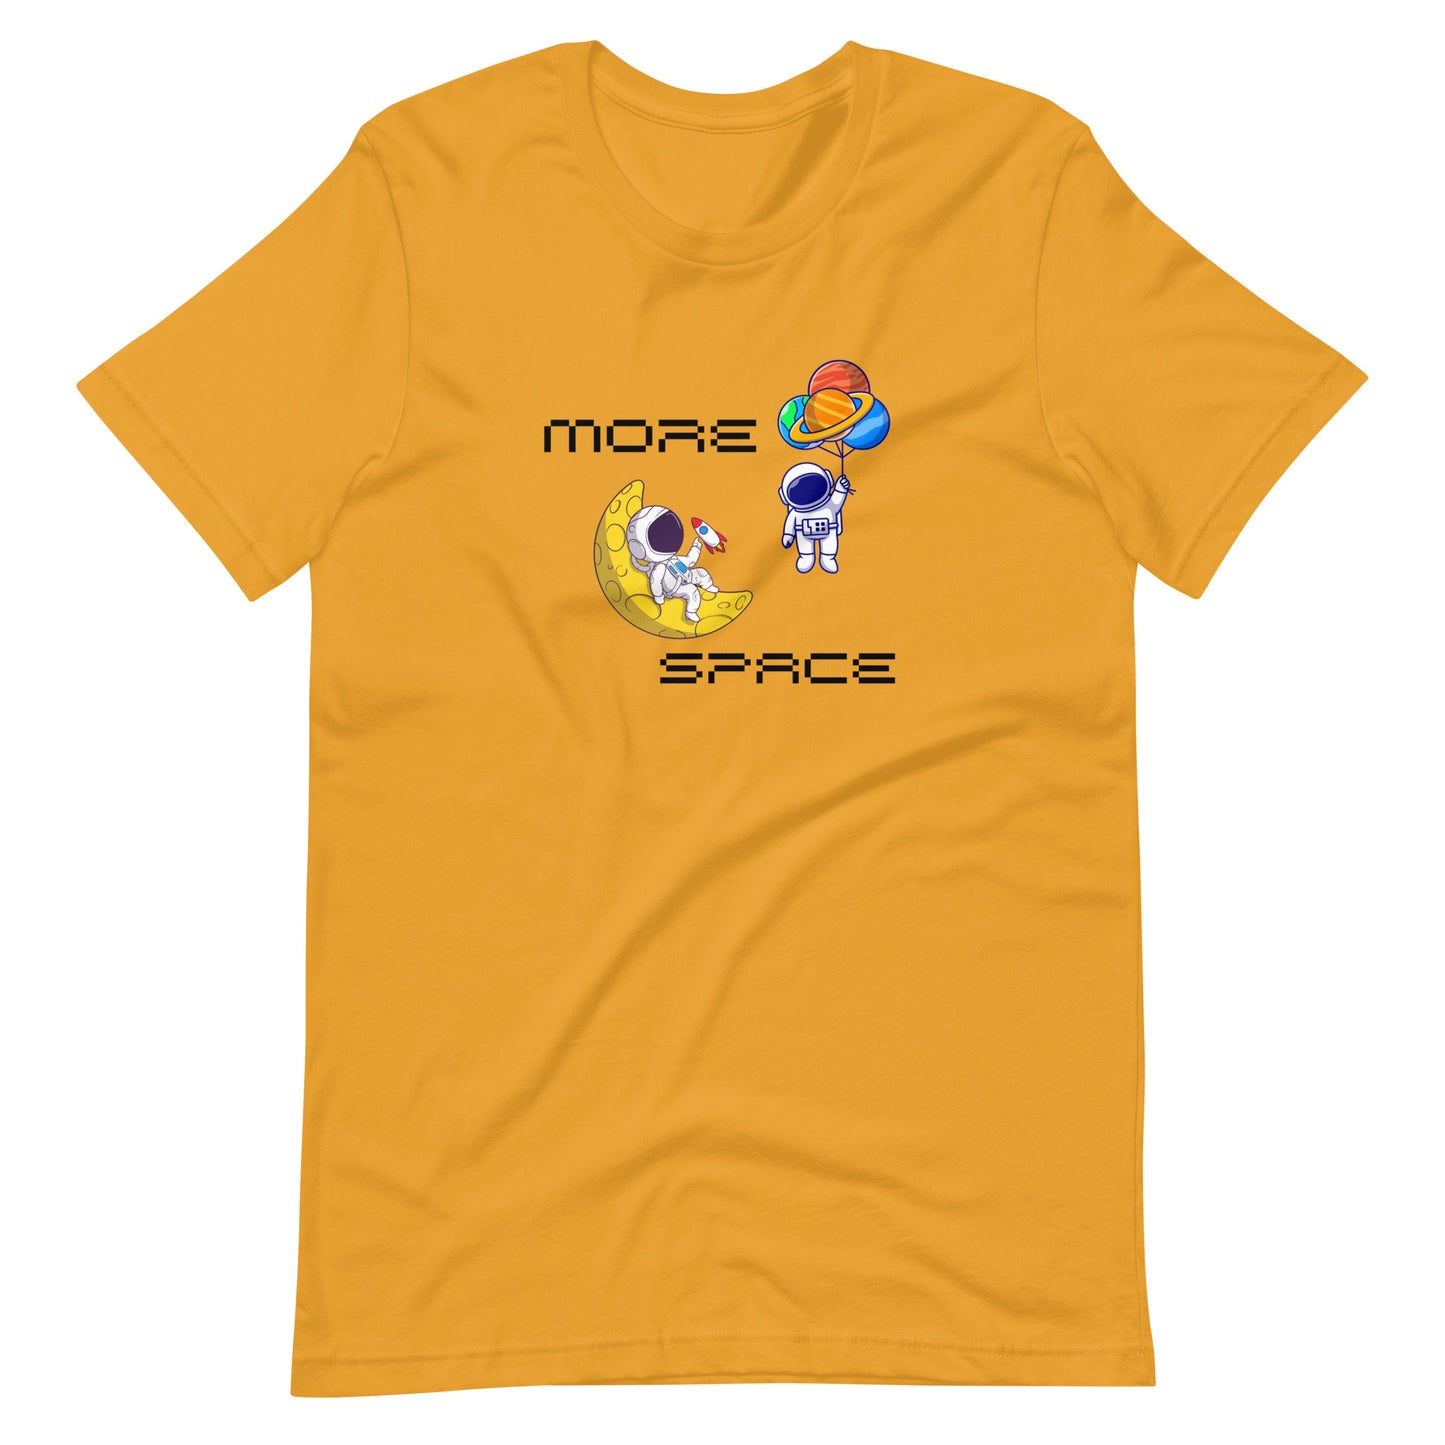 More space Unisex t-shirt